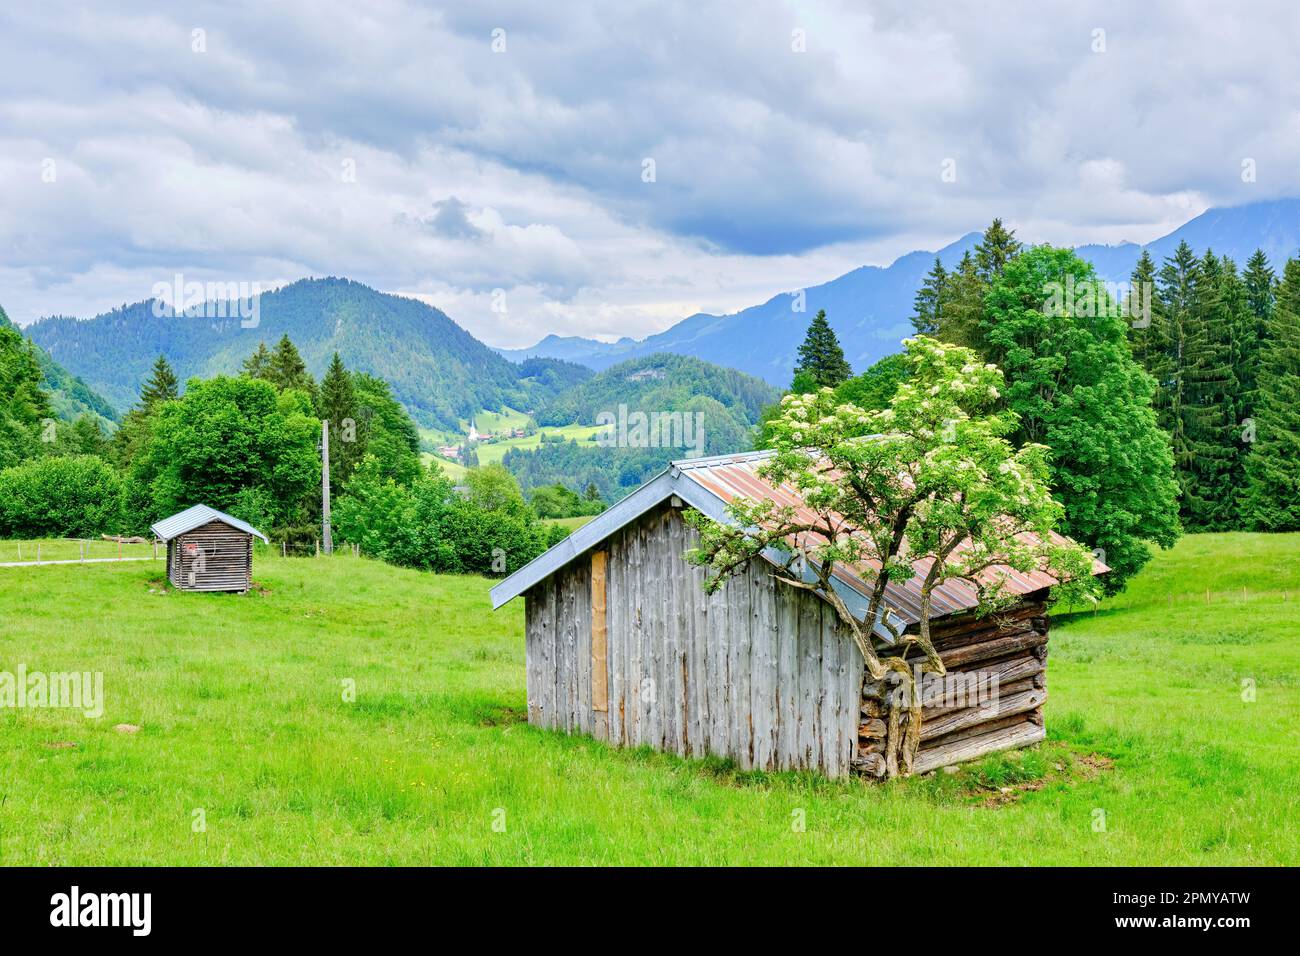 Small alpine shed as a shelter for grazing animals in a mountain setting in the Allgaeu Alps near Oberstdorf in Bavaria, Germany. Stock Photo